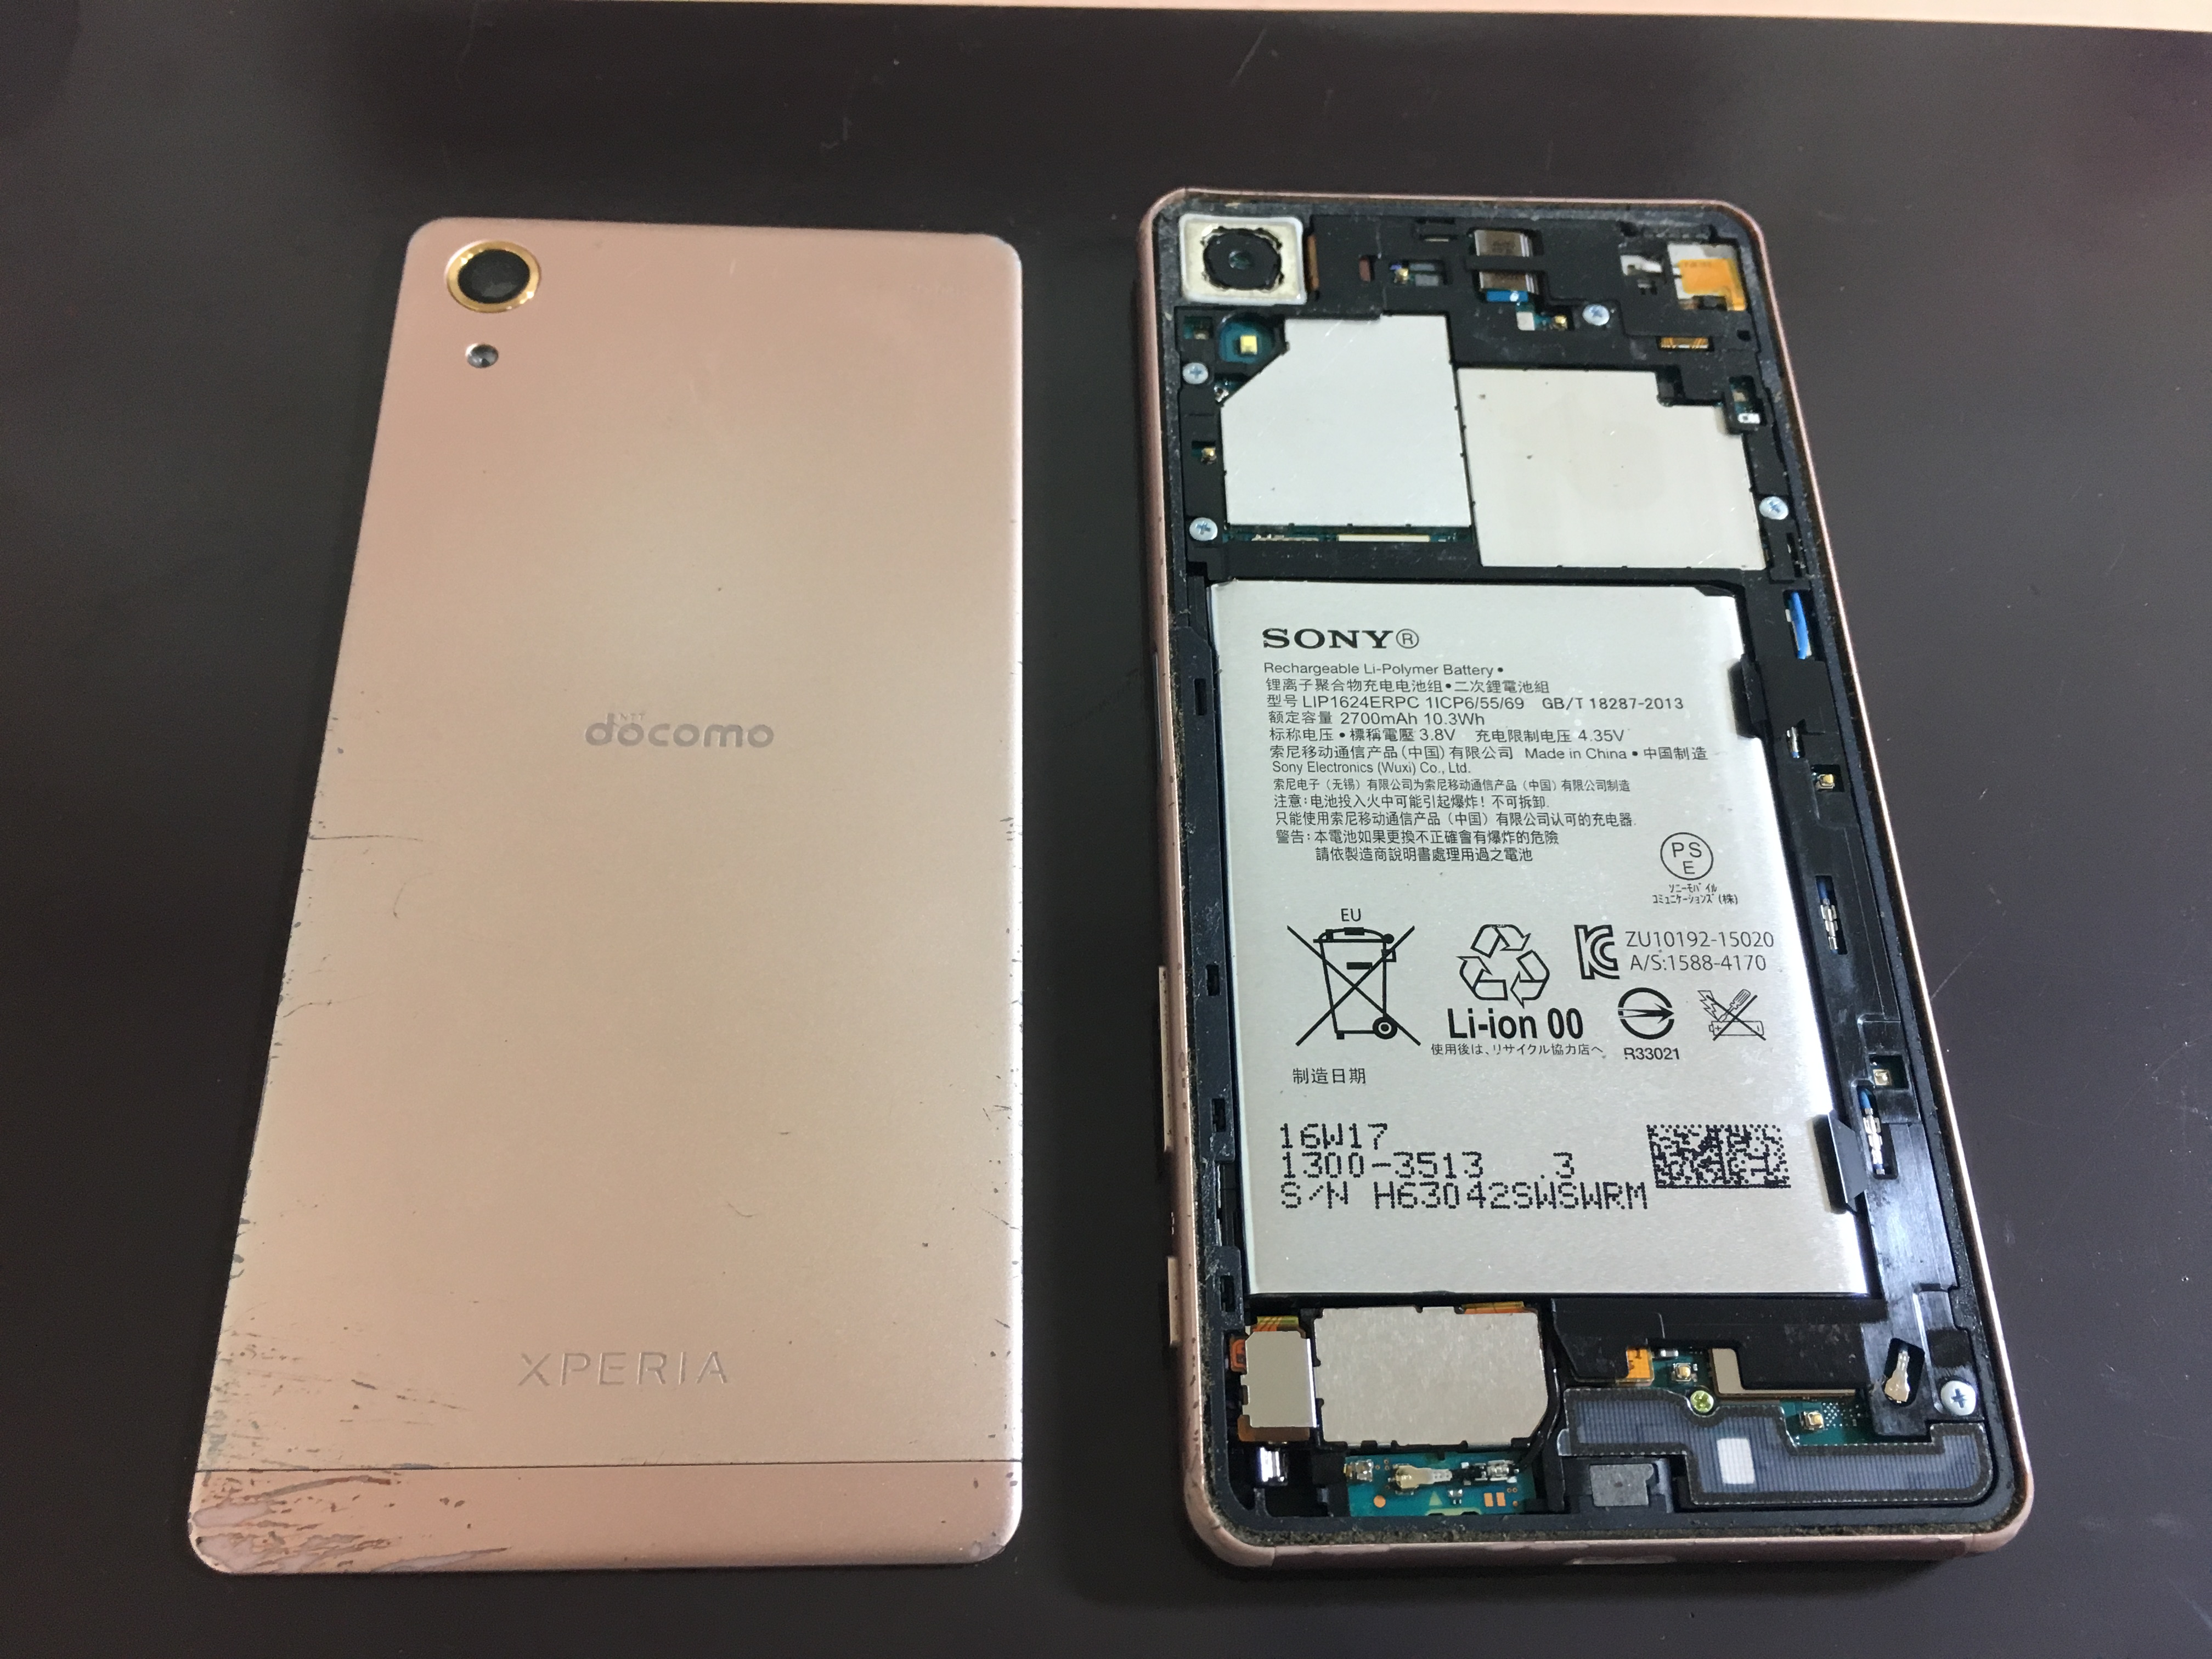 Xperia X Performance 画面割れ 液晶割れの修理を行いました